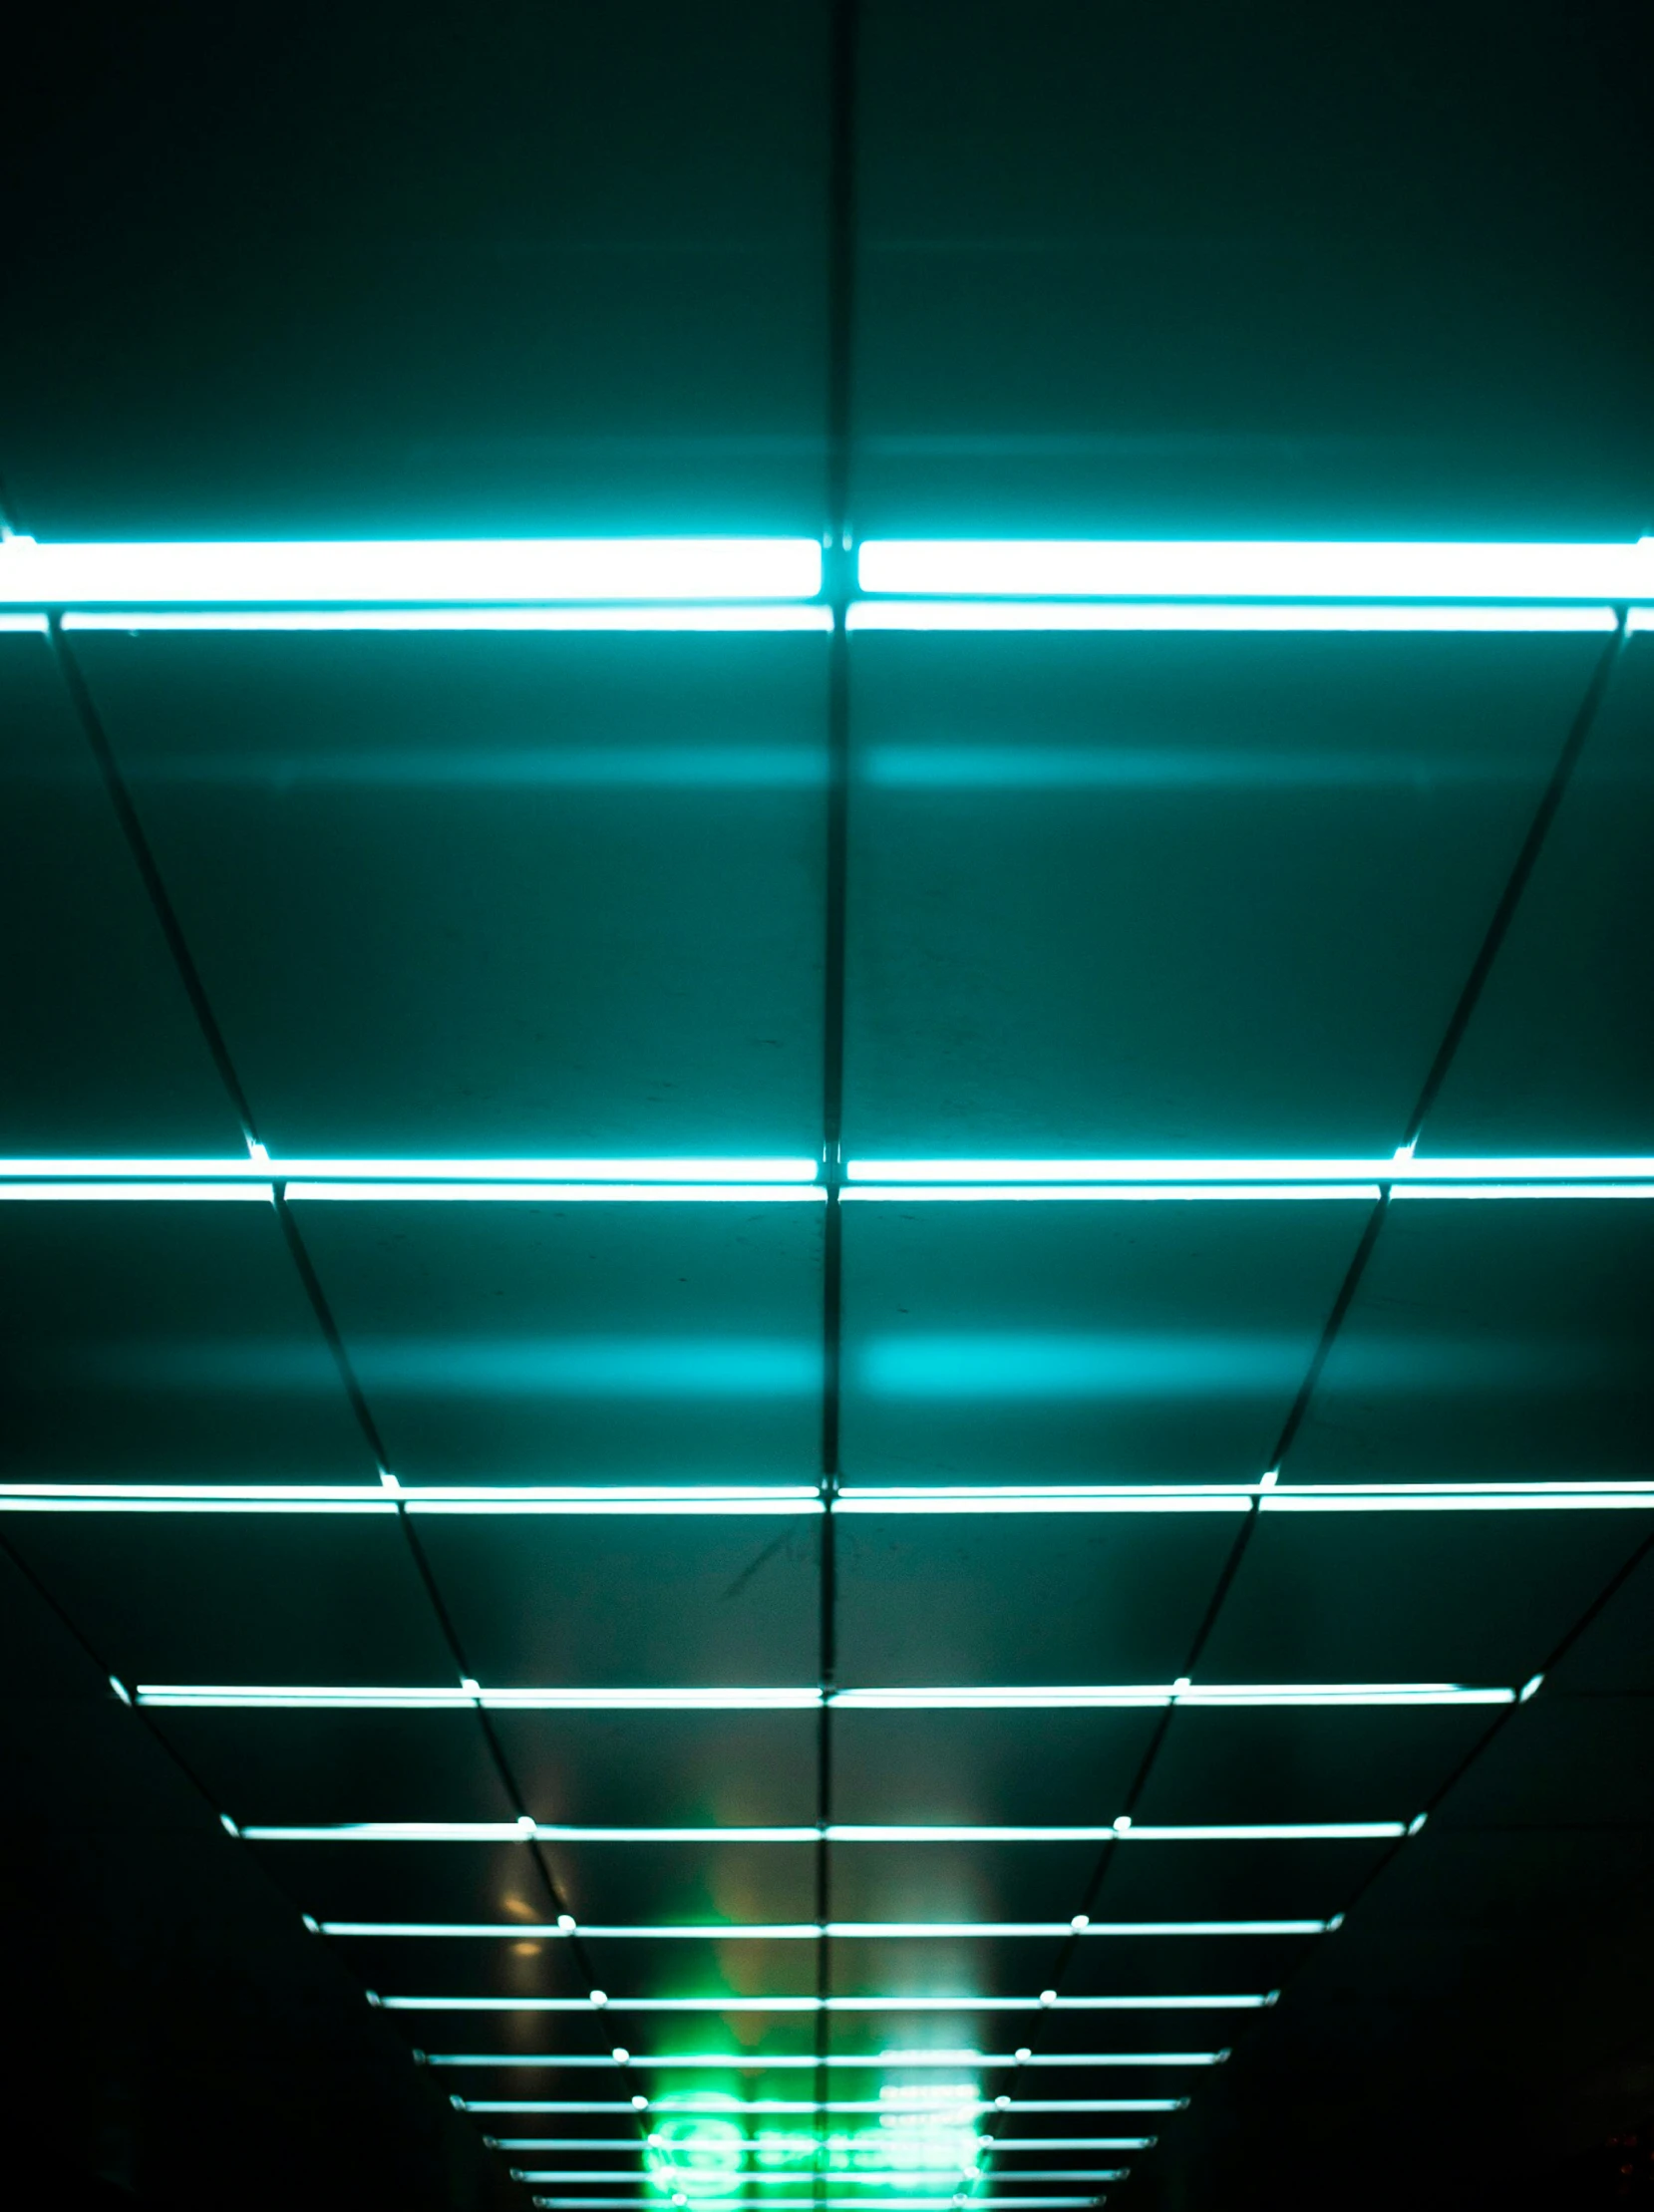 an overhead walkway is shown with fluorescent lights